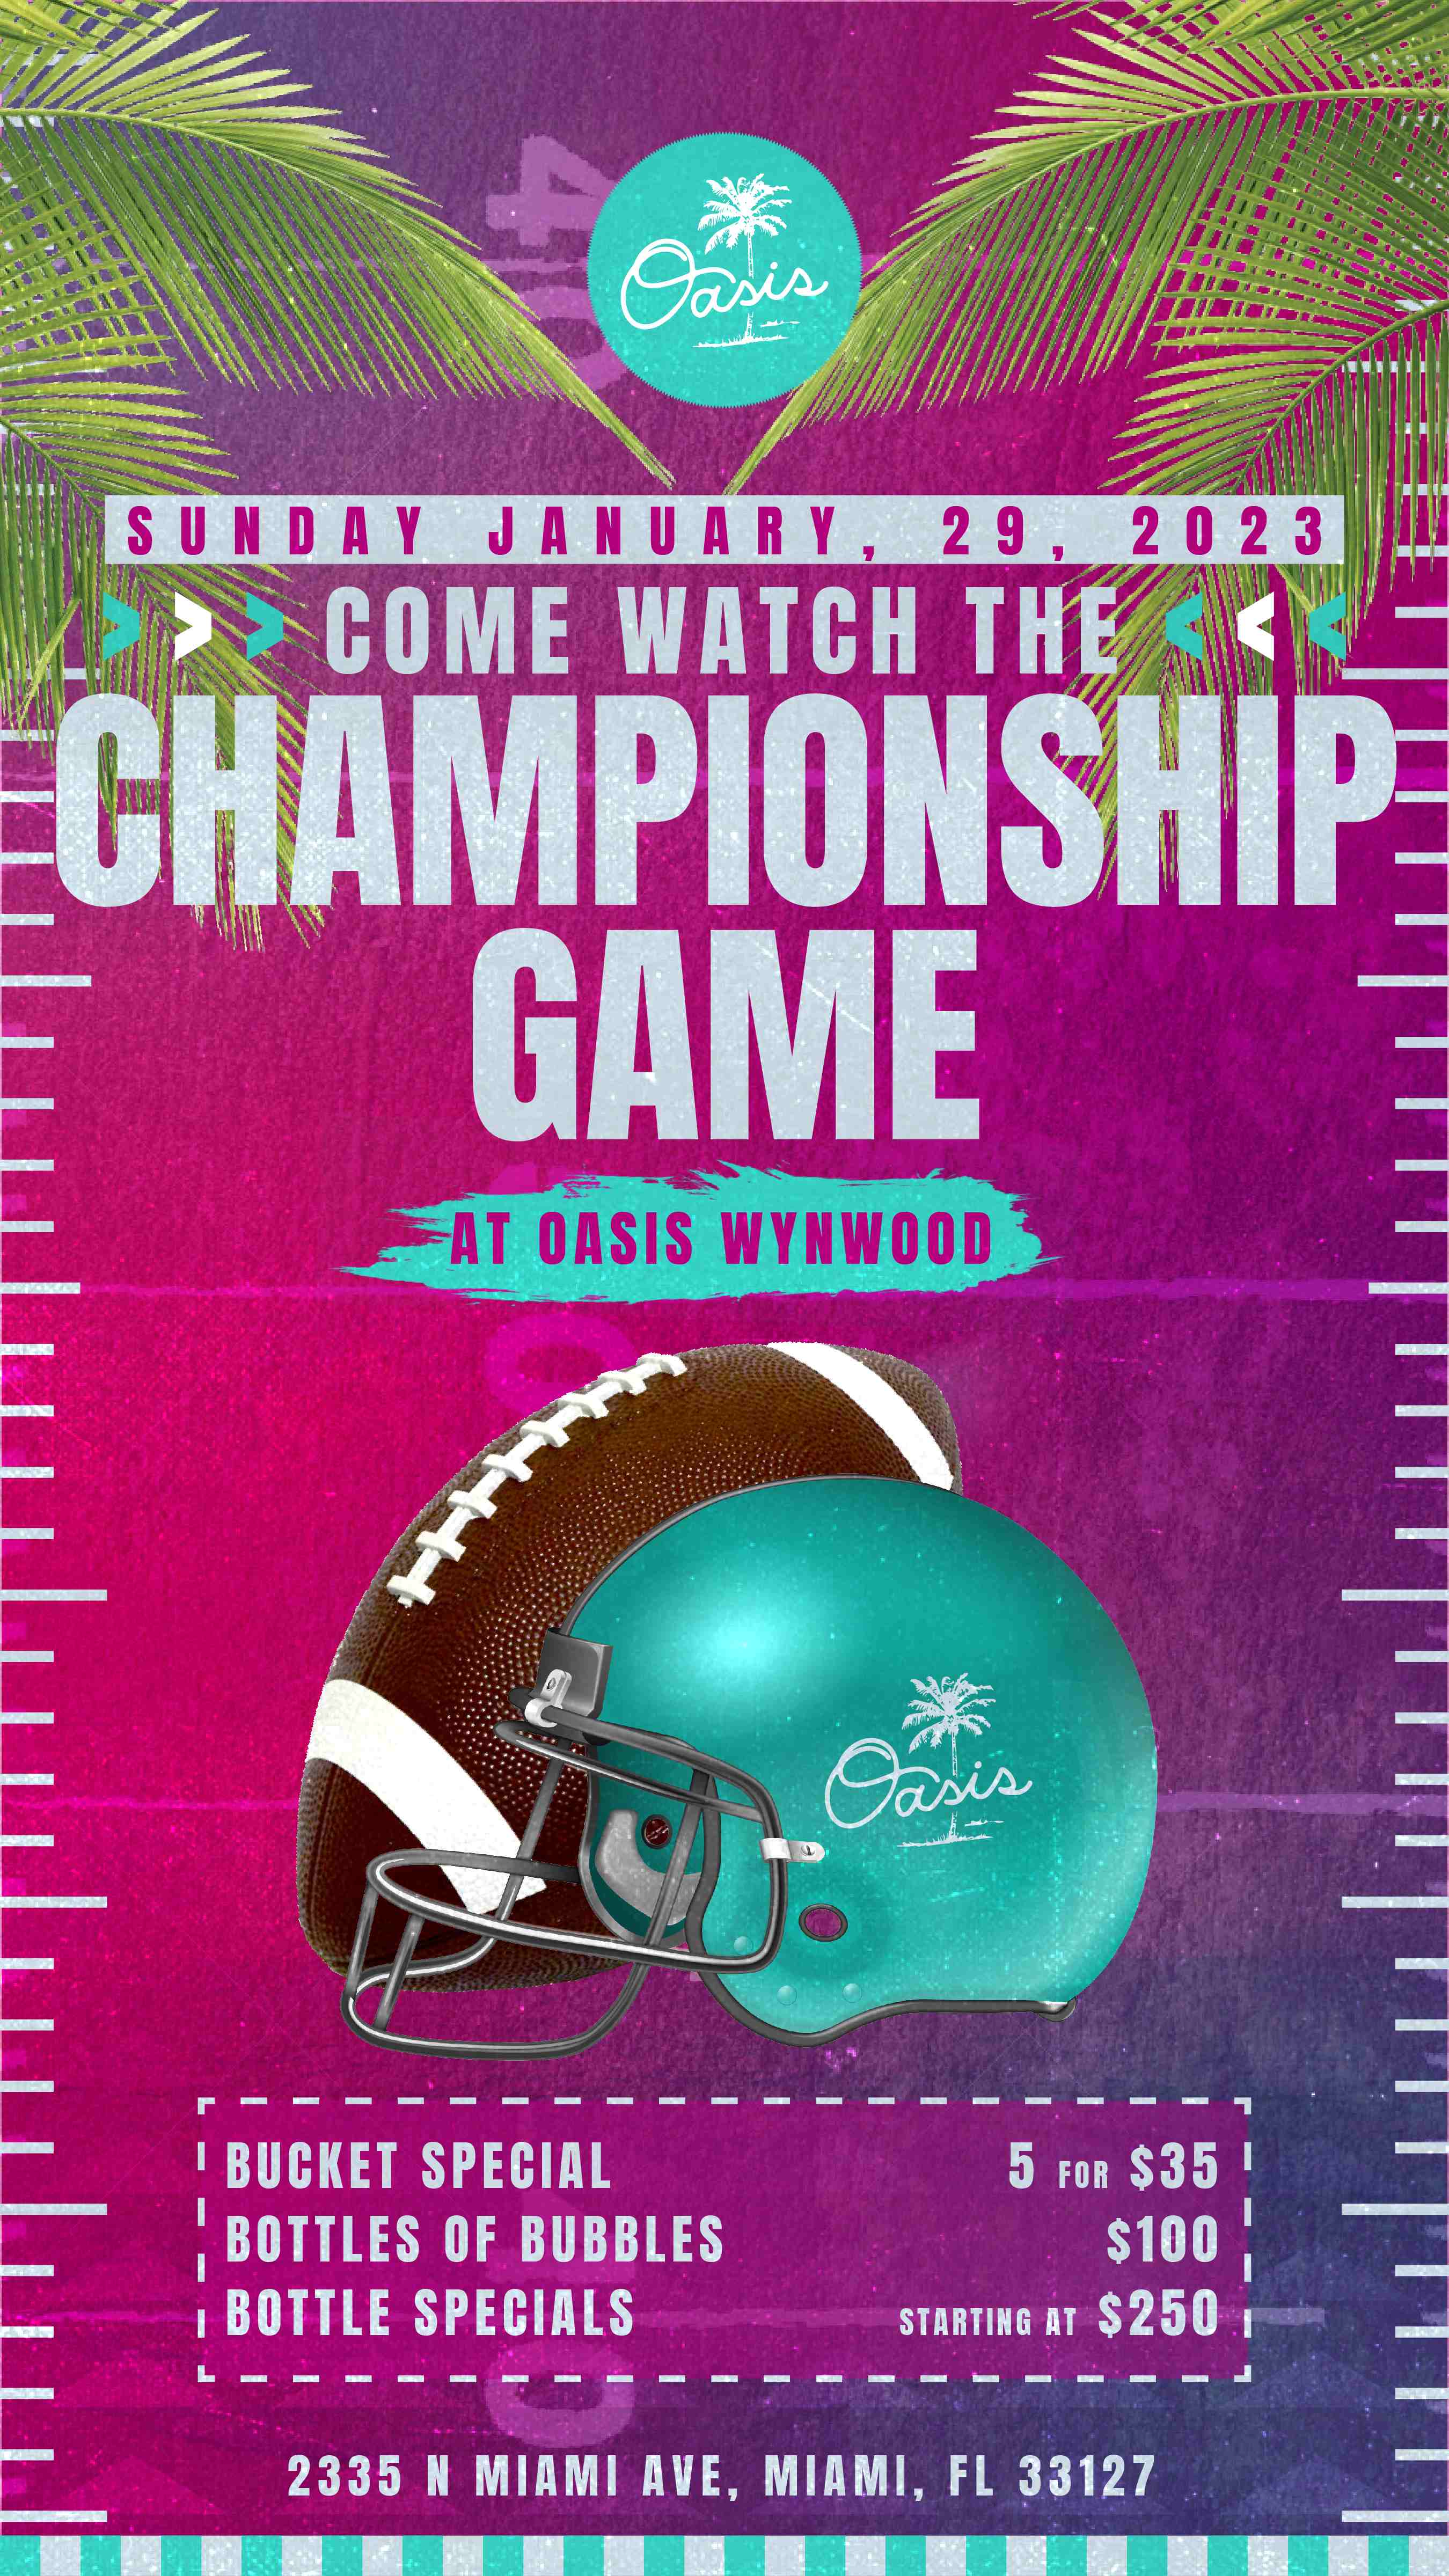 NFL CHAMPIONSHIP GAME Tickets at Oasis Wynwood in Miami by Oasis